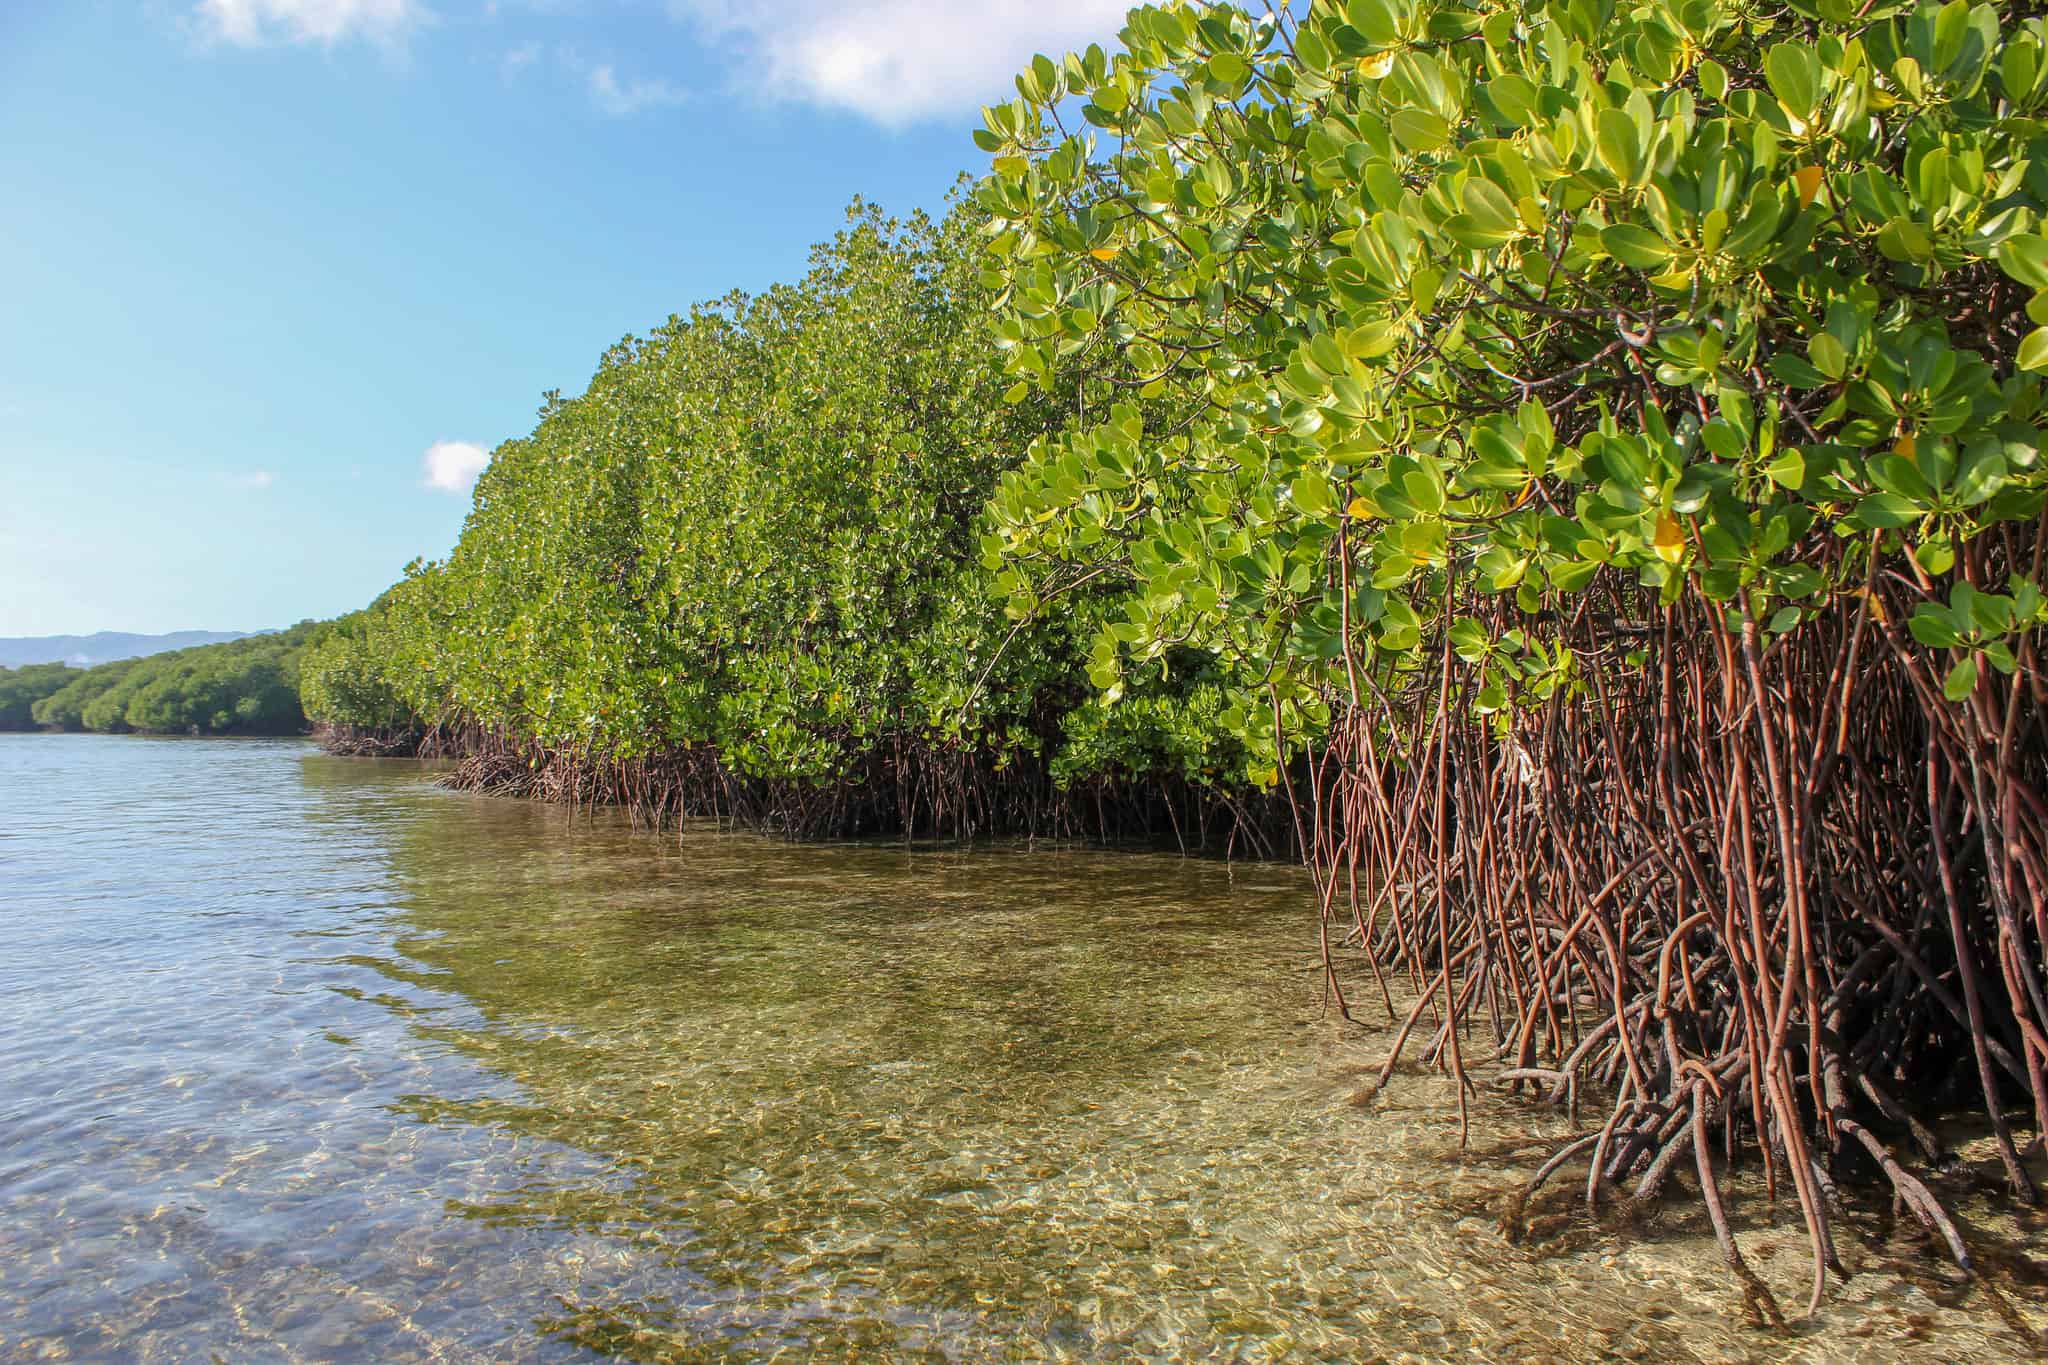 Apple invests in mangrove forests like this one. They could be key to fighting climate change.